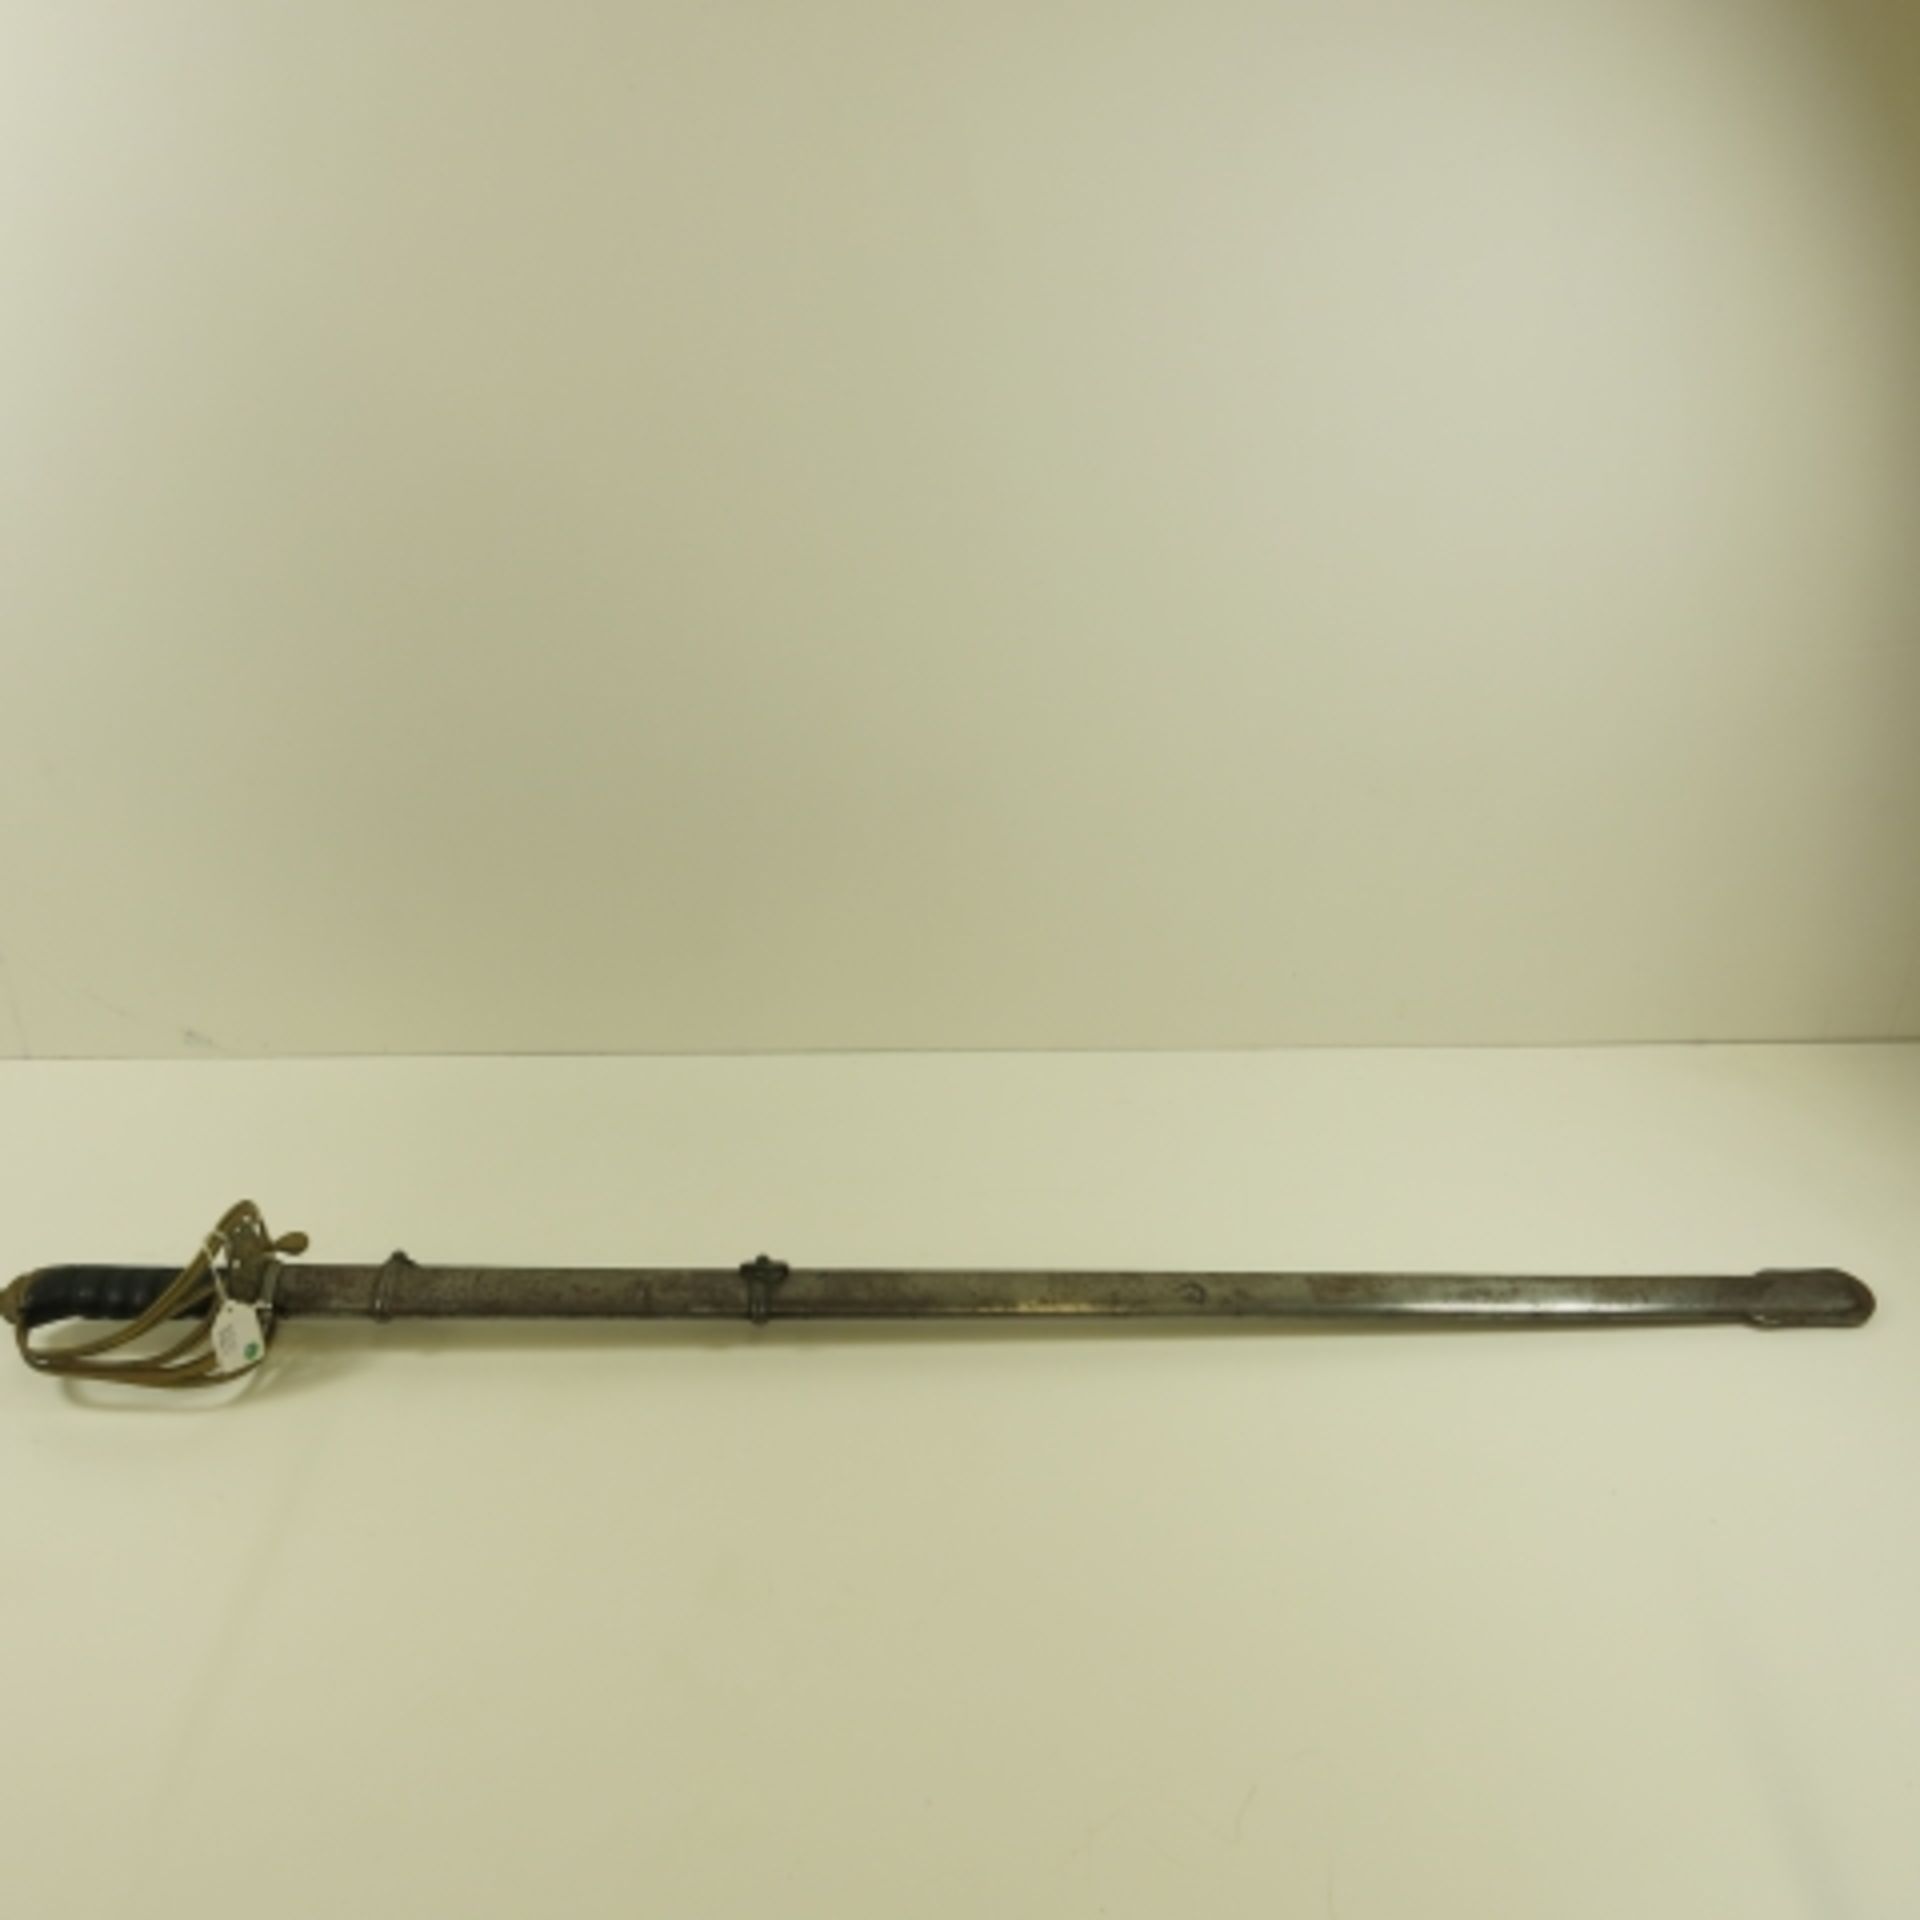 A VR Infantry Sword with chased blade. The 1892 (?) pattern British Victorian Infantry Sword with '